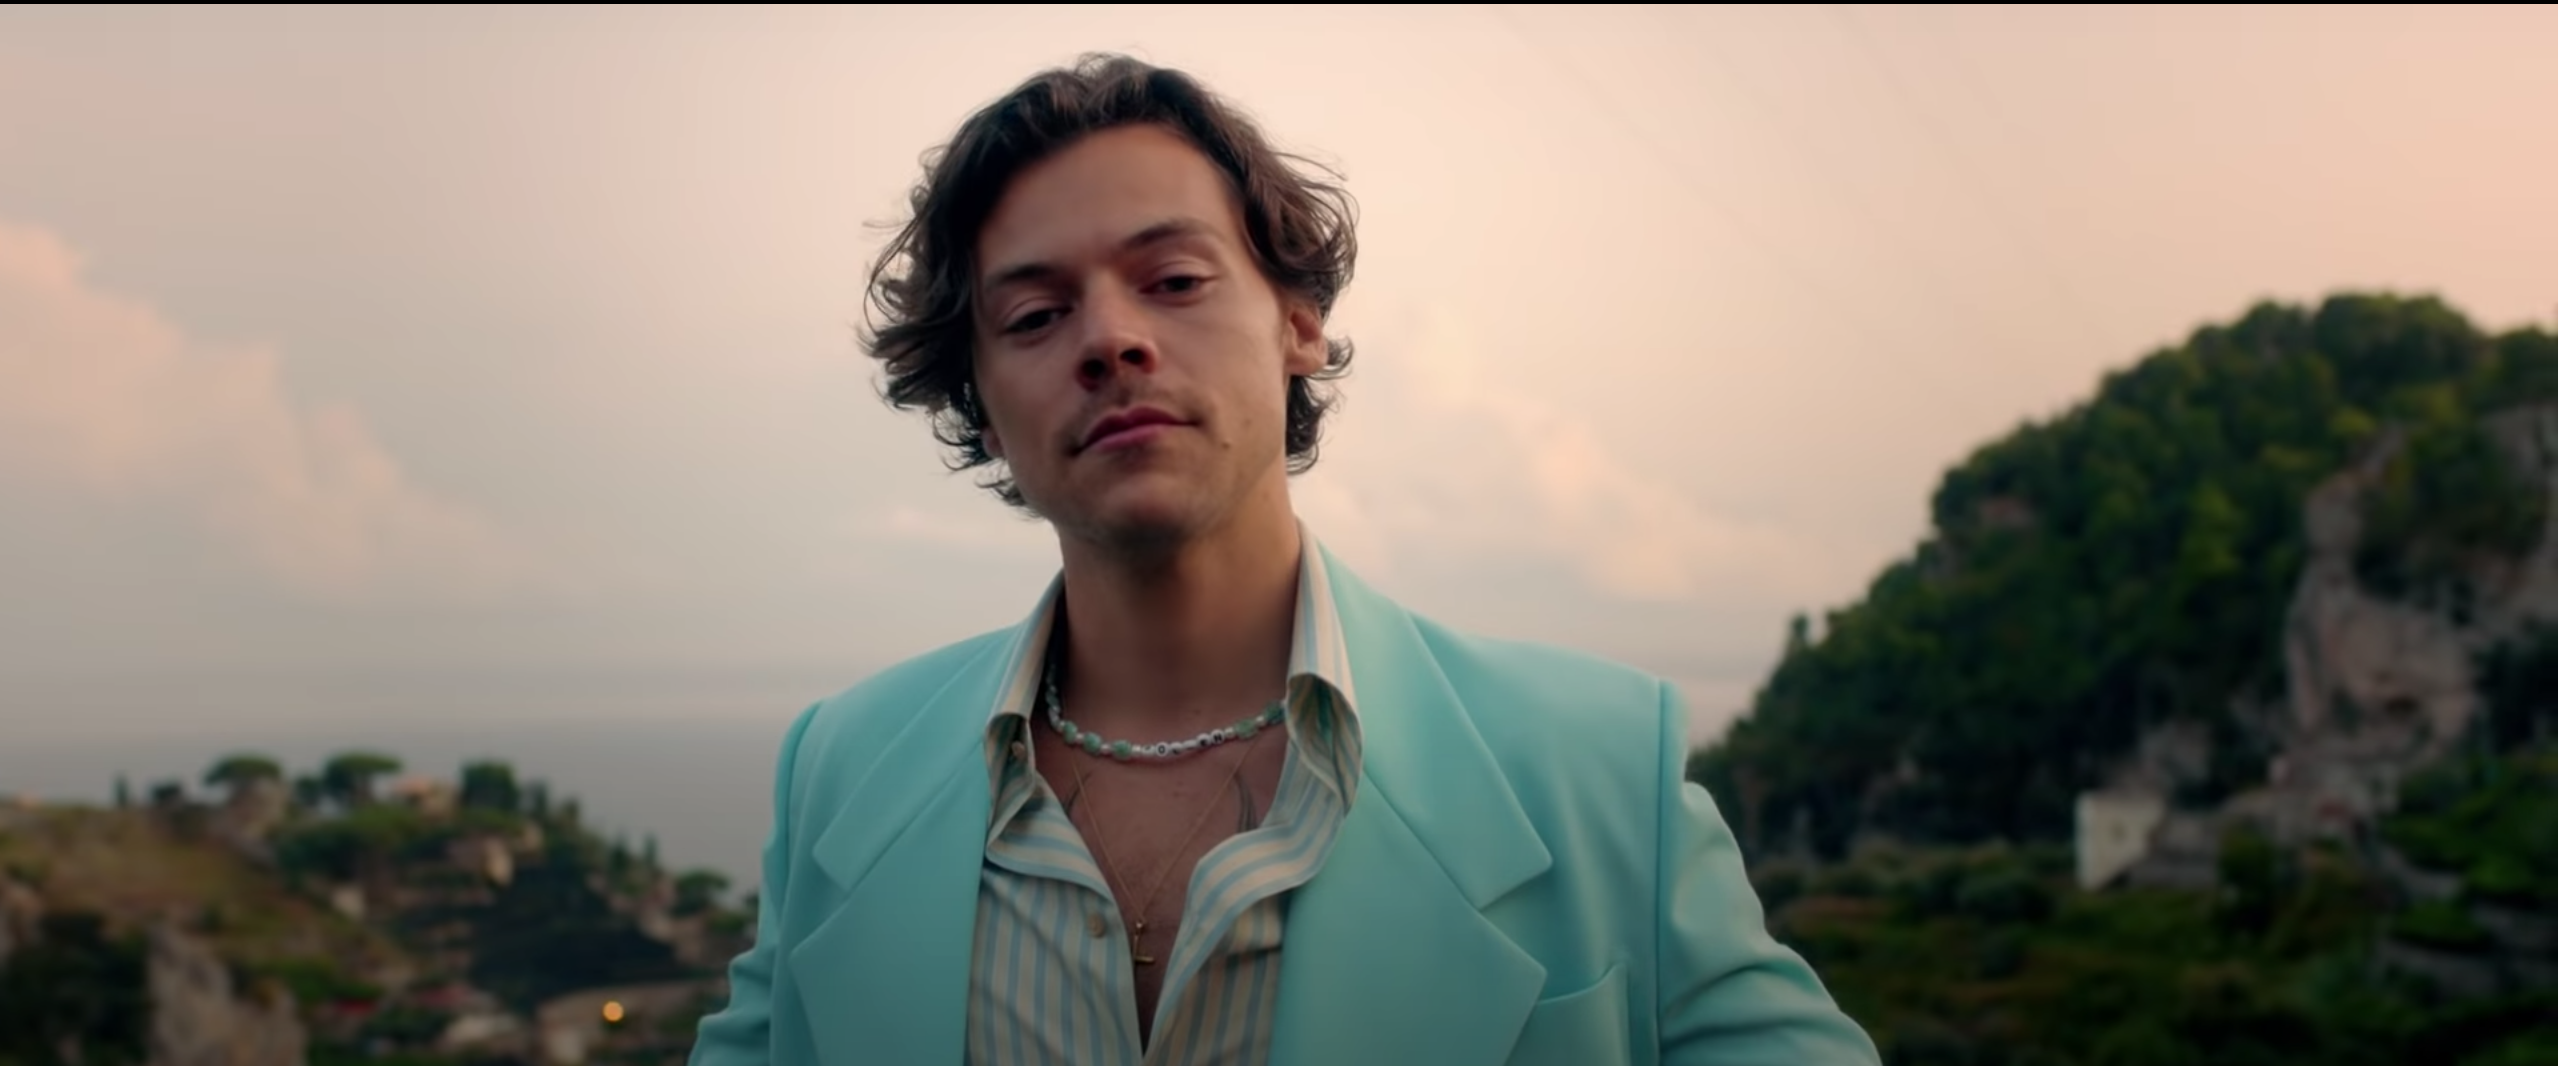 Review: Harry Styles' “Golden” music video filled with light-soaked joy |  The Baylor Lariat